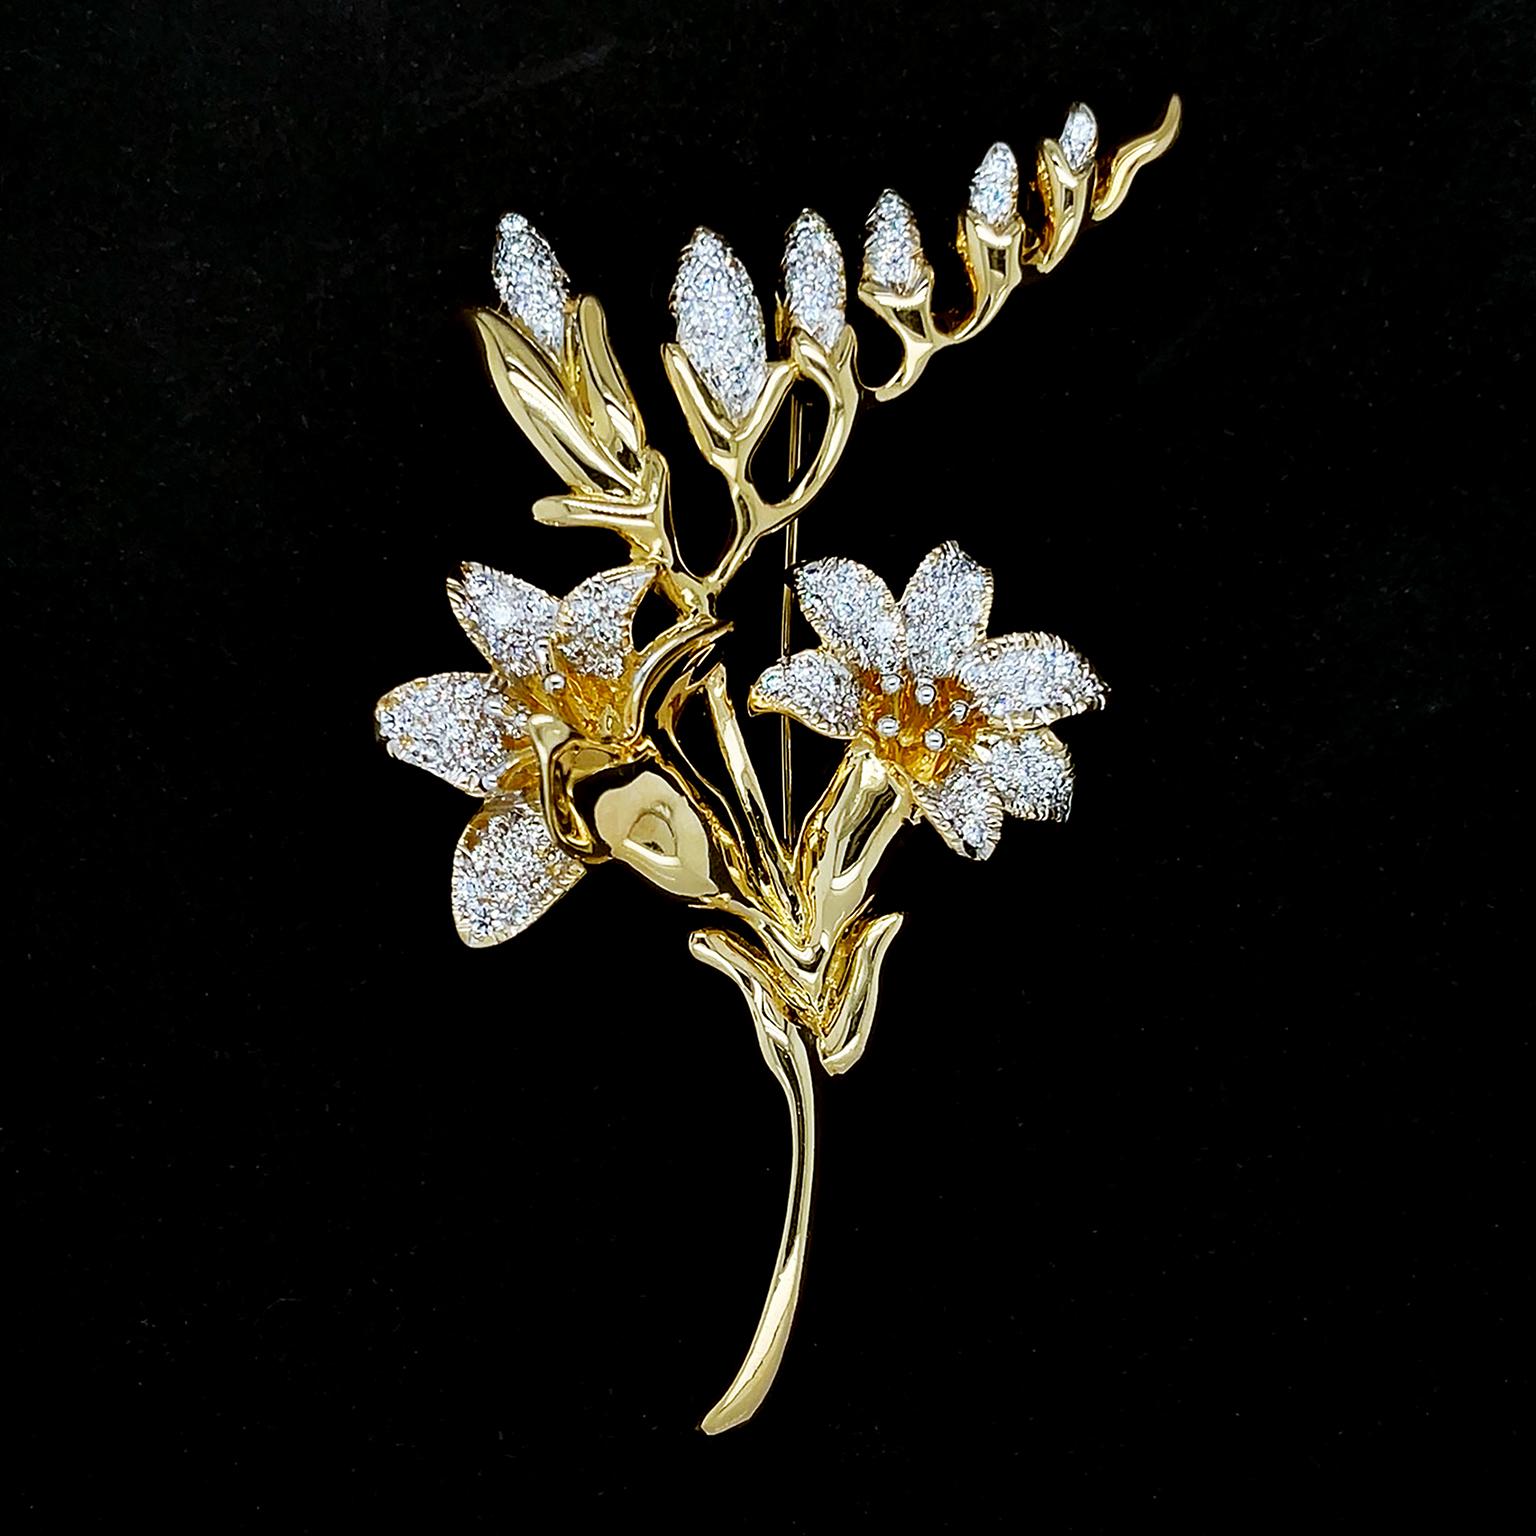 Bloomed flowers are the inspiration for this brooch. 18k yellow gold forms the stems and leaves, while pave set brilliant cut diamonds illustrate the twinkling petals. An asymmetrical gold stem above the flowers features buds of diamonds. The total